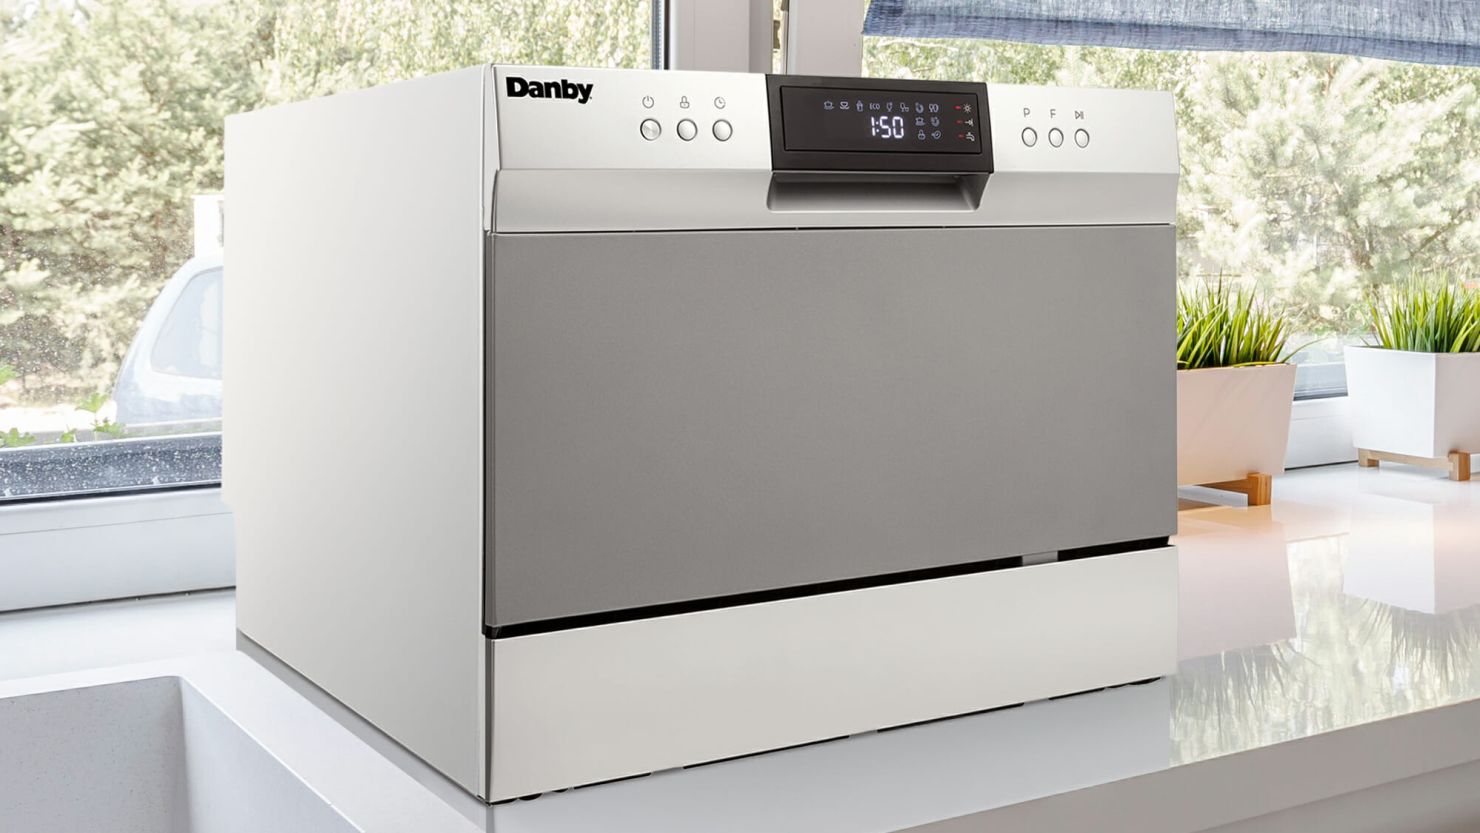 Danby 6 Place Setting Countertop Dishwasher in Silver - DDW631SDB